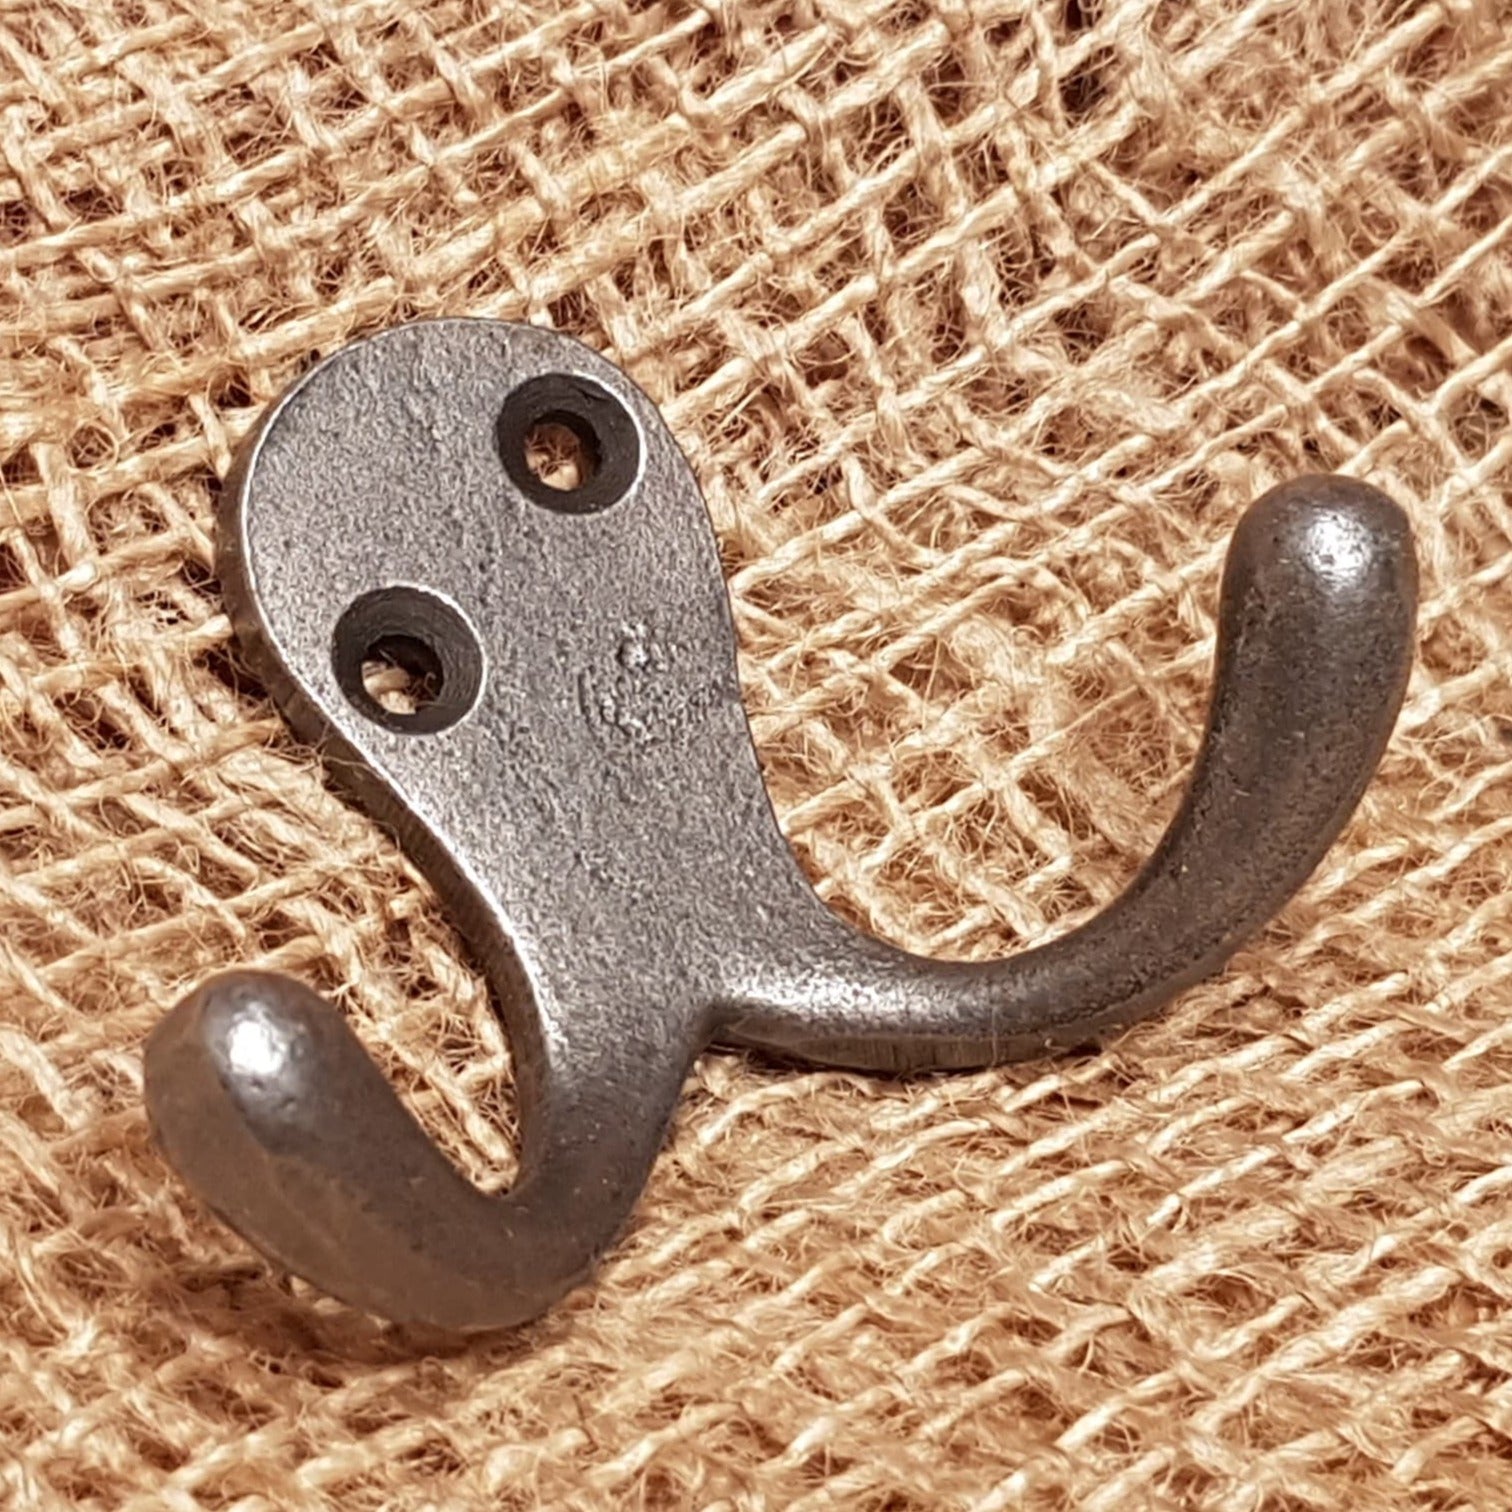 Aged Brass Double Coat and Hat Hook